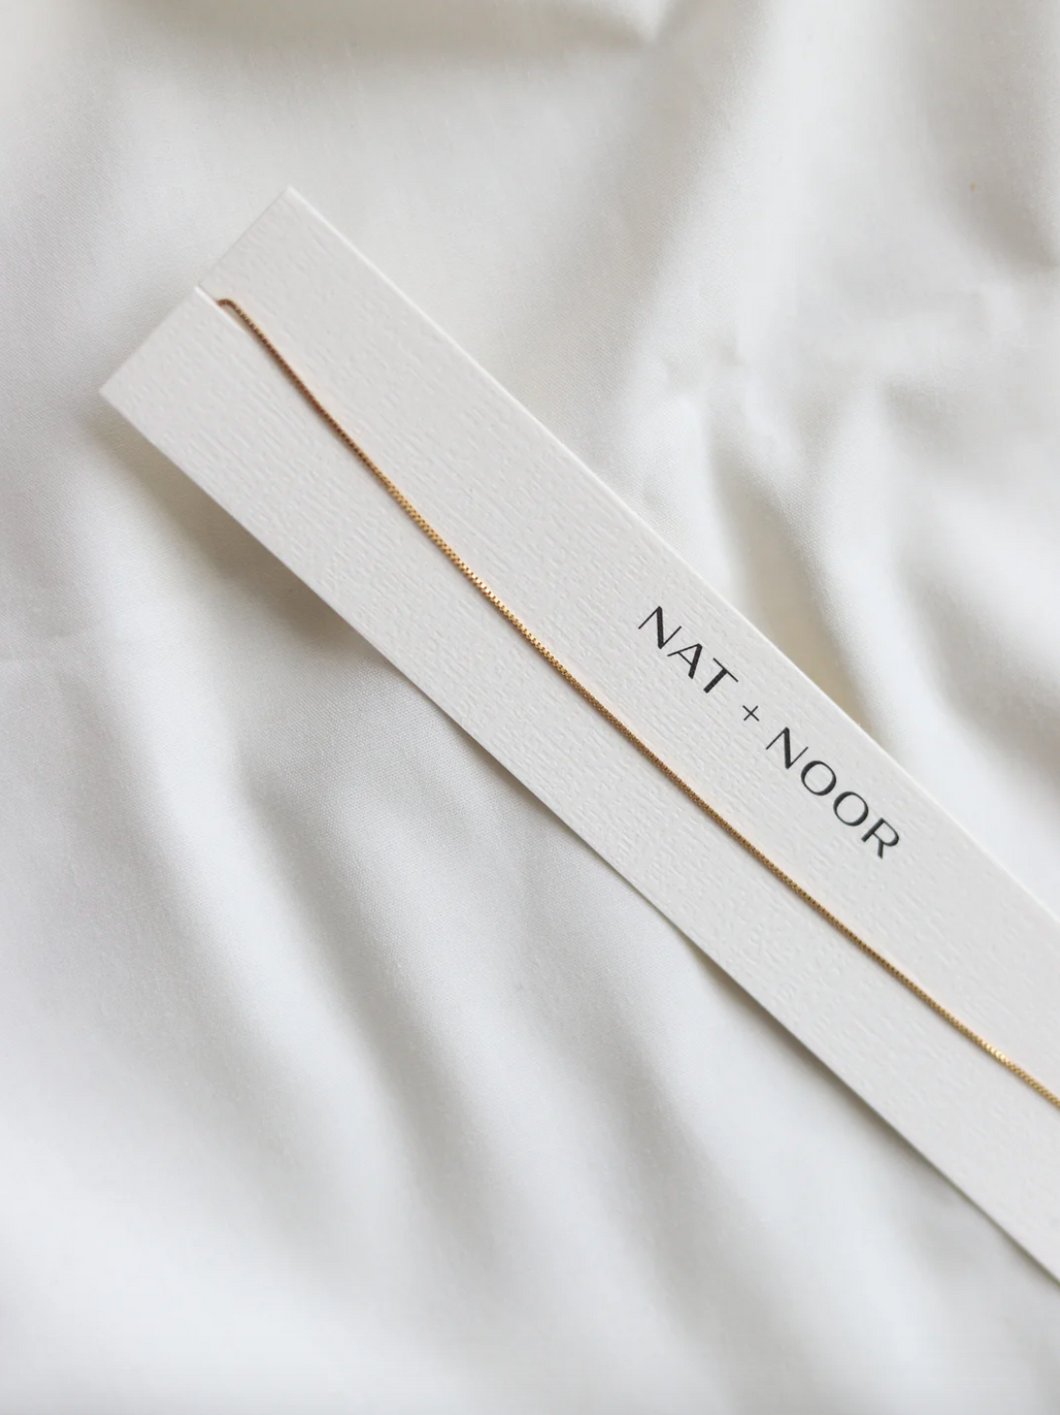 Delicate Chain Necklace by Nat + Noor